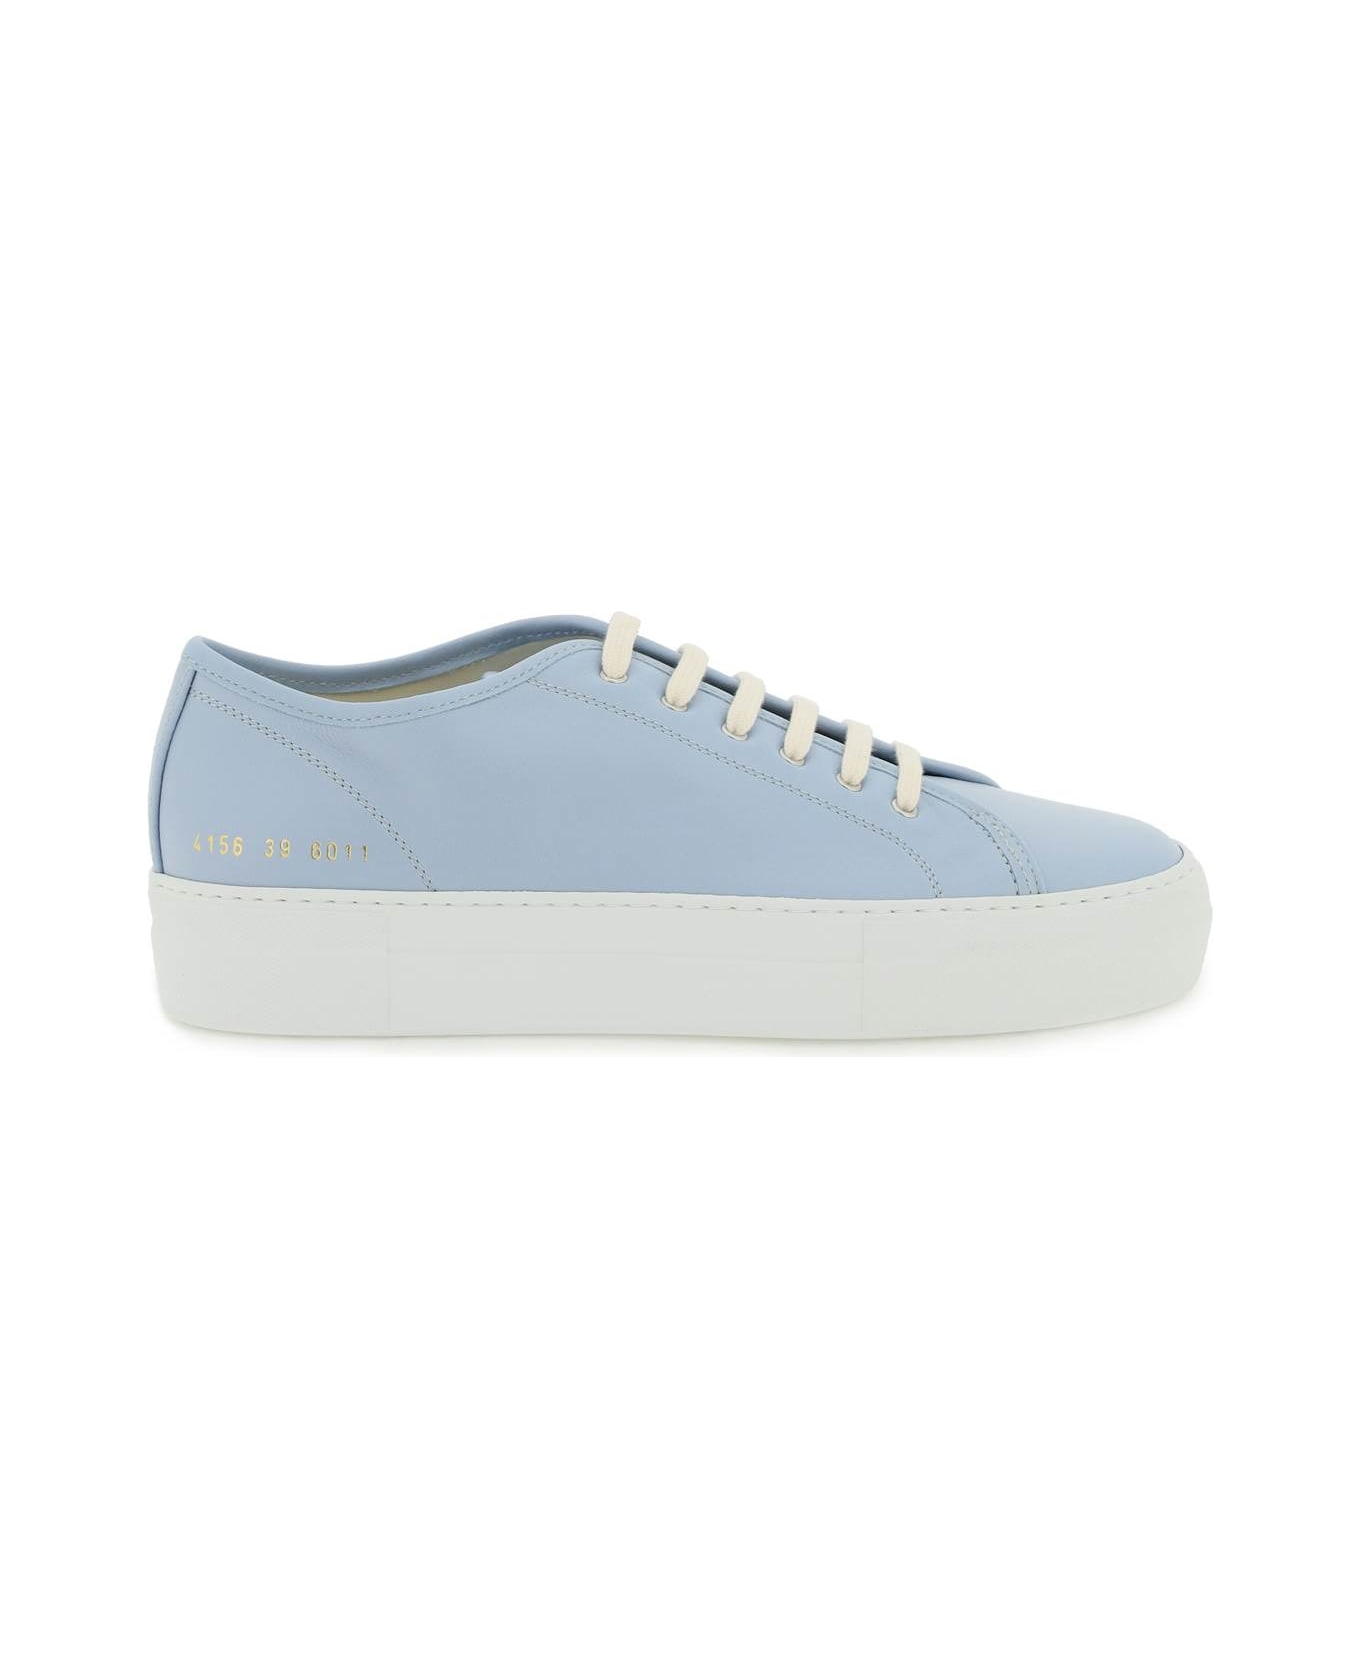 Common Projects Leather Tournament Low Super Sneakers - BABY BLUE (Light blue)